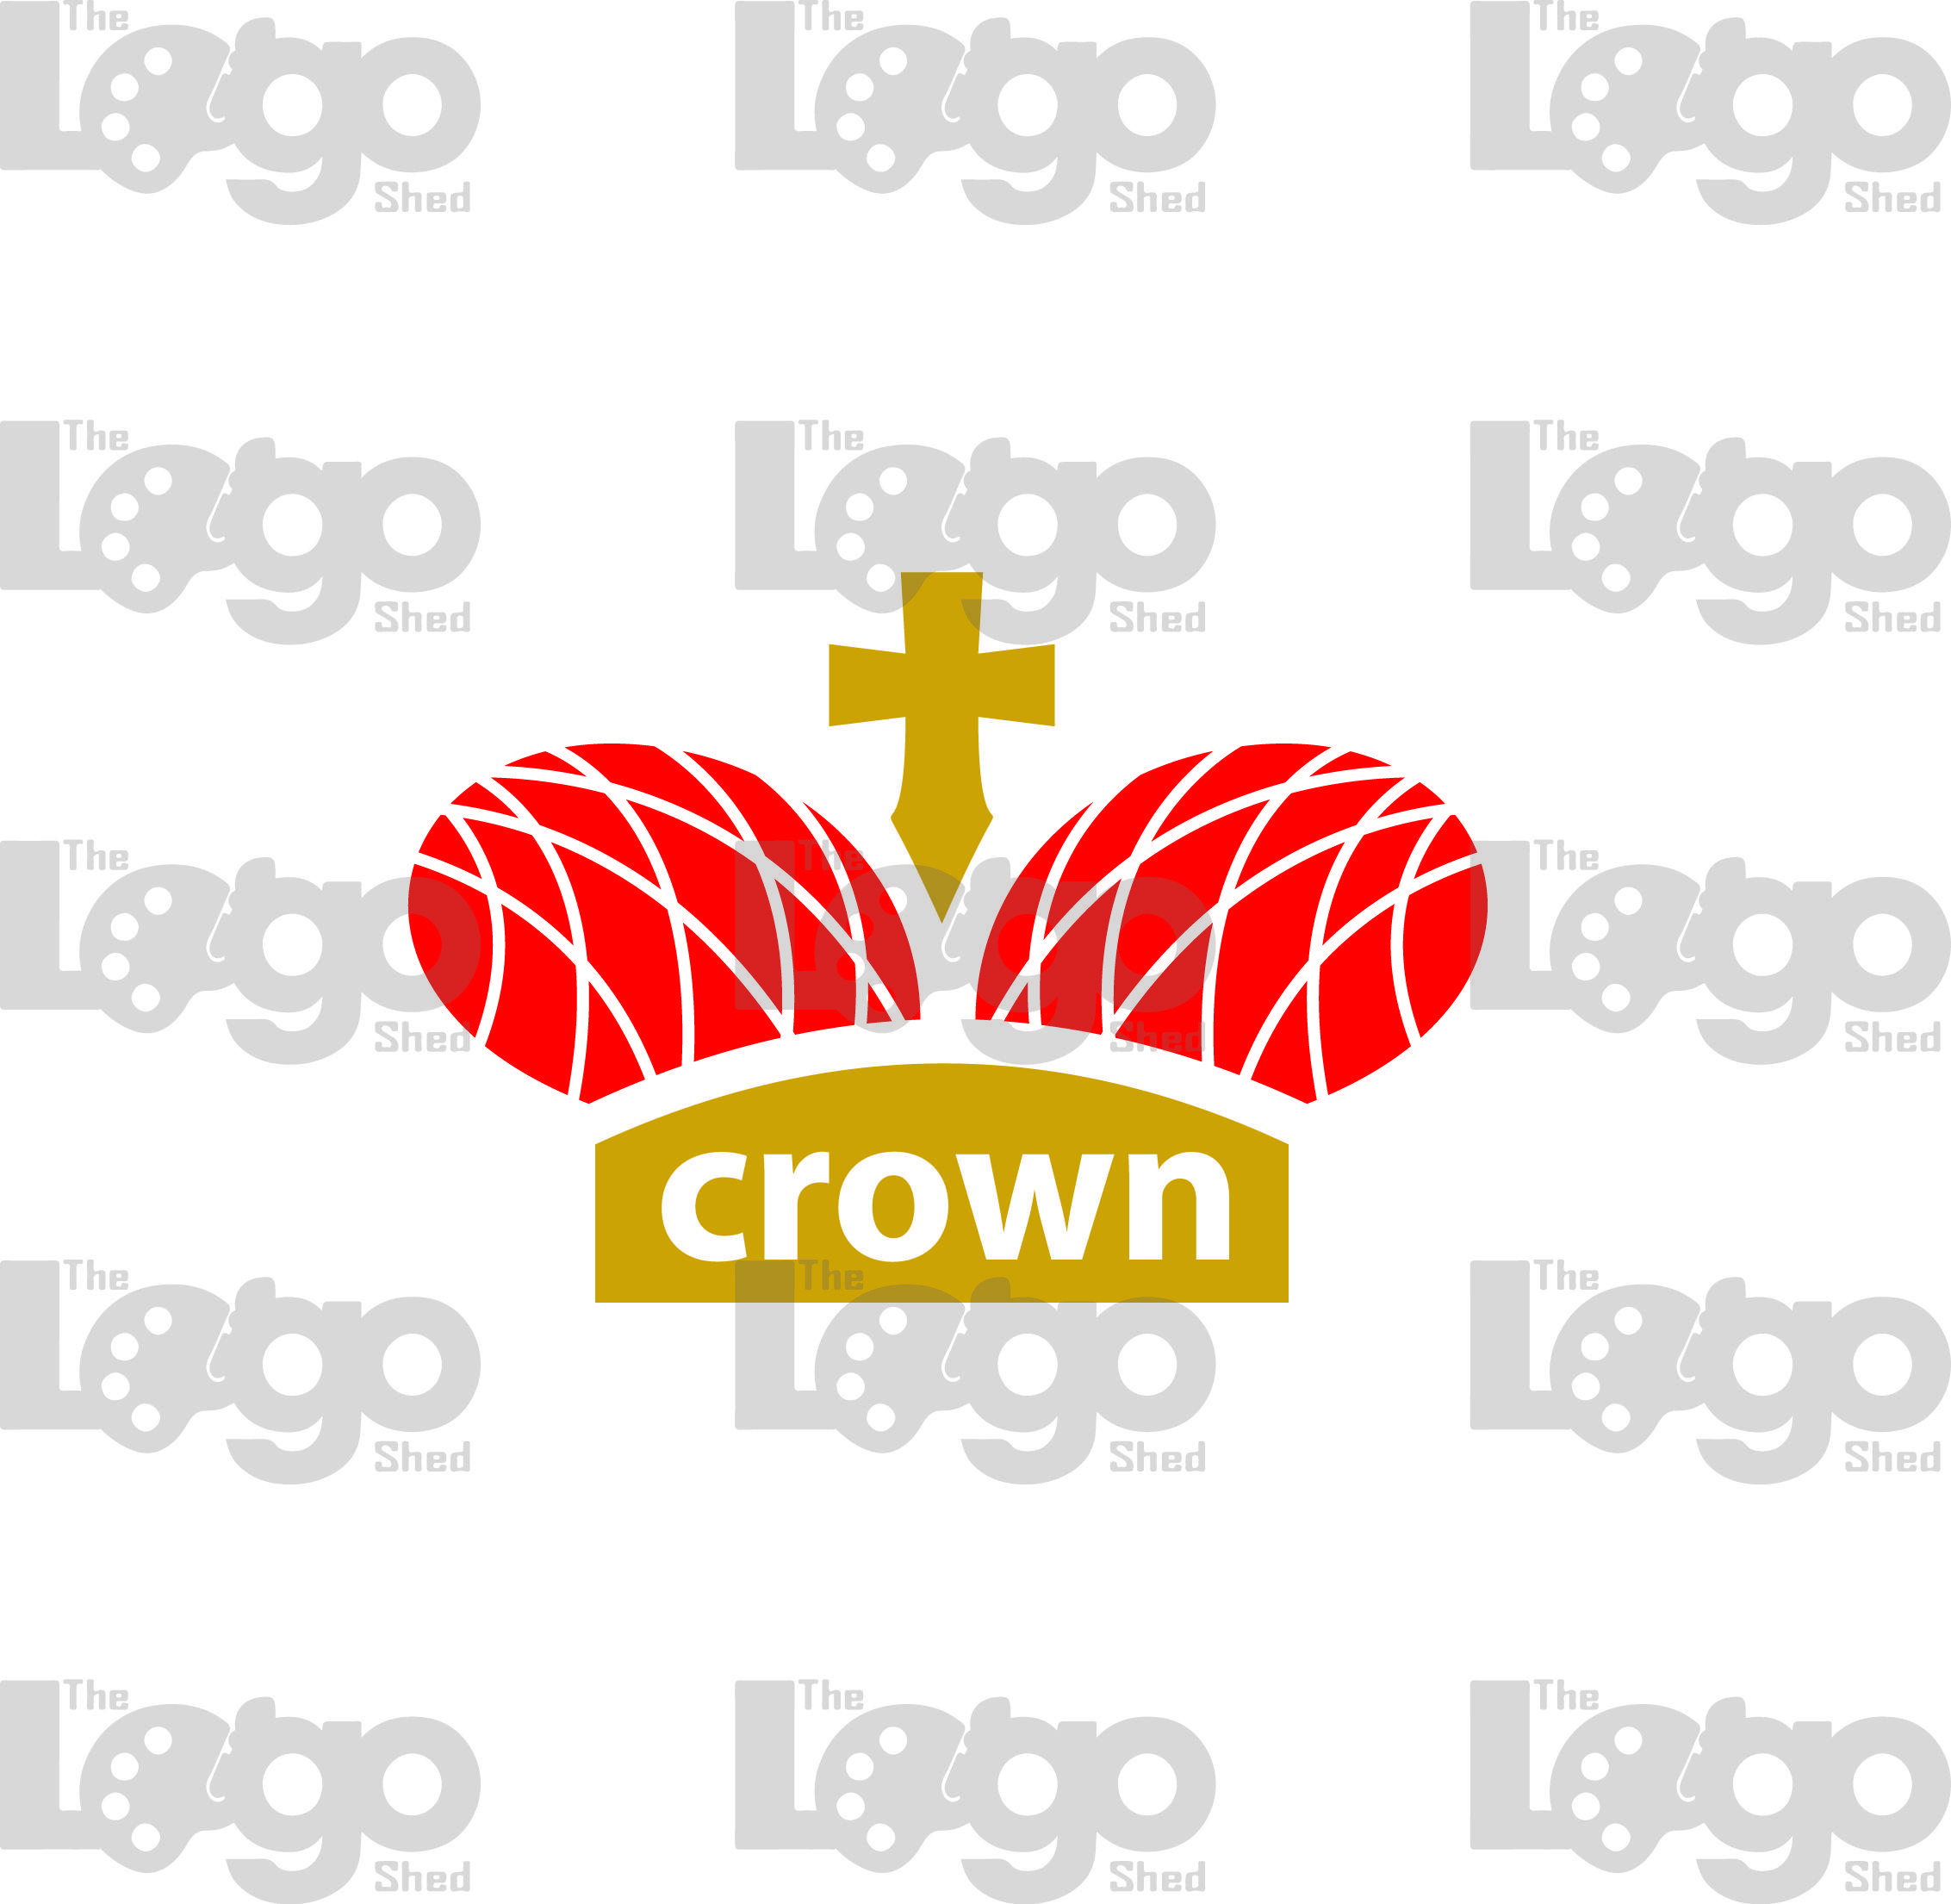 Red and Gold Crown Logo - Black & Red Crown Logo. The Logo Shed